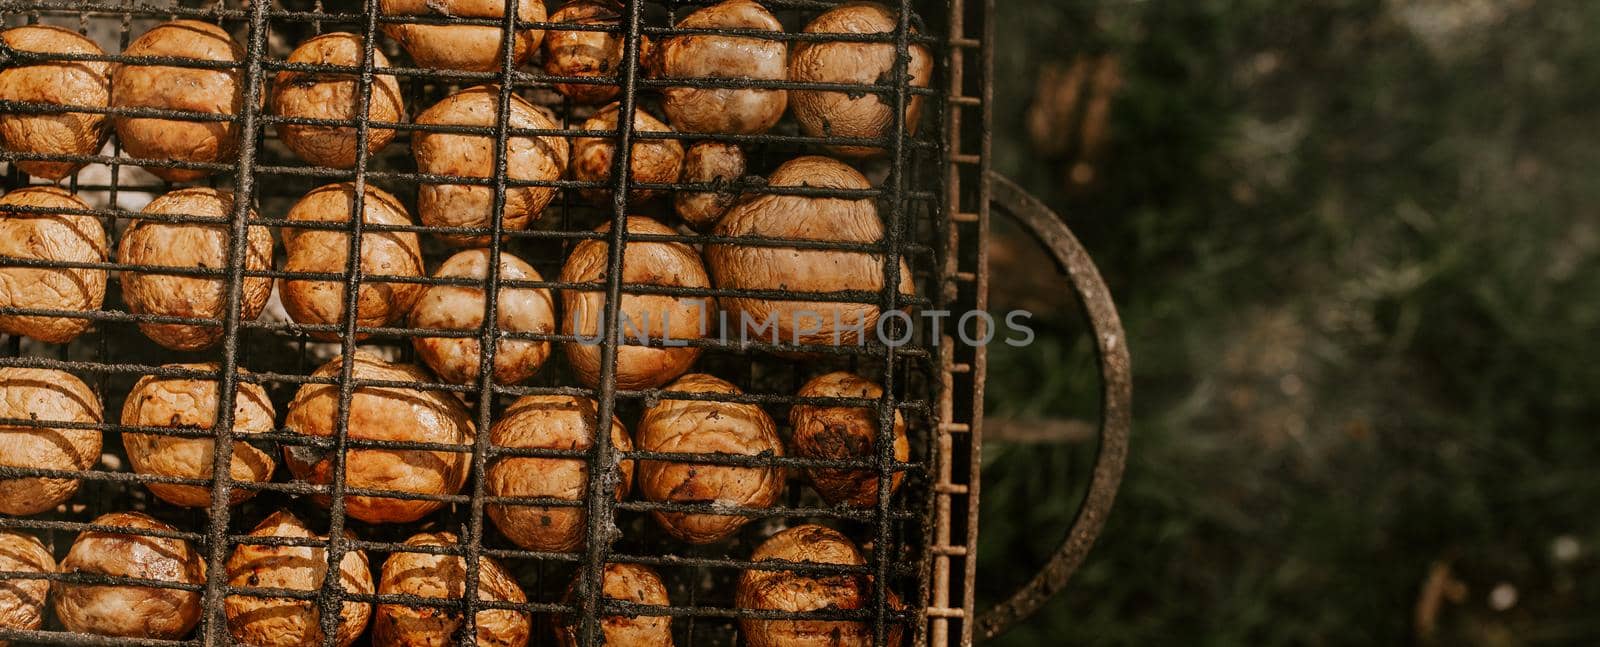 white identical small round mushrooms champignons stacked in even rows in a barbecue on the grill. Green grass background. Summer. White smoke over baked vegetables.